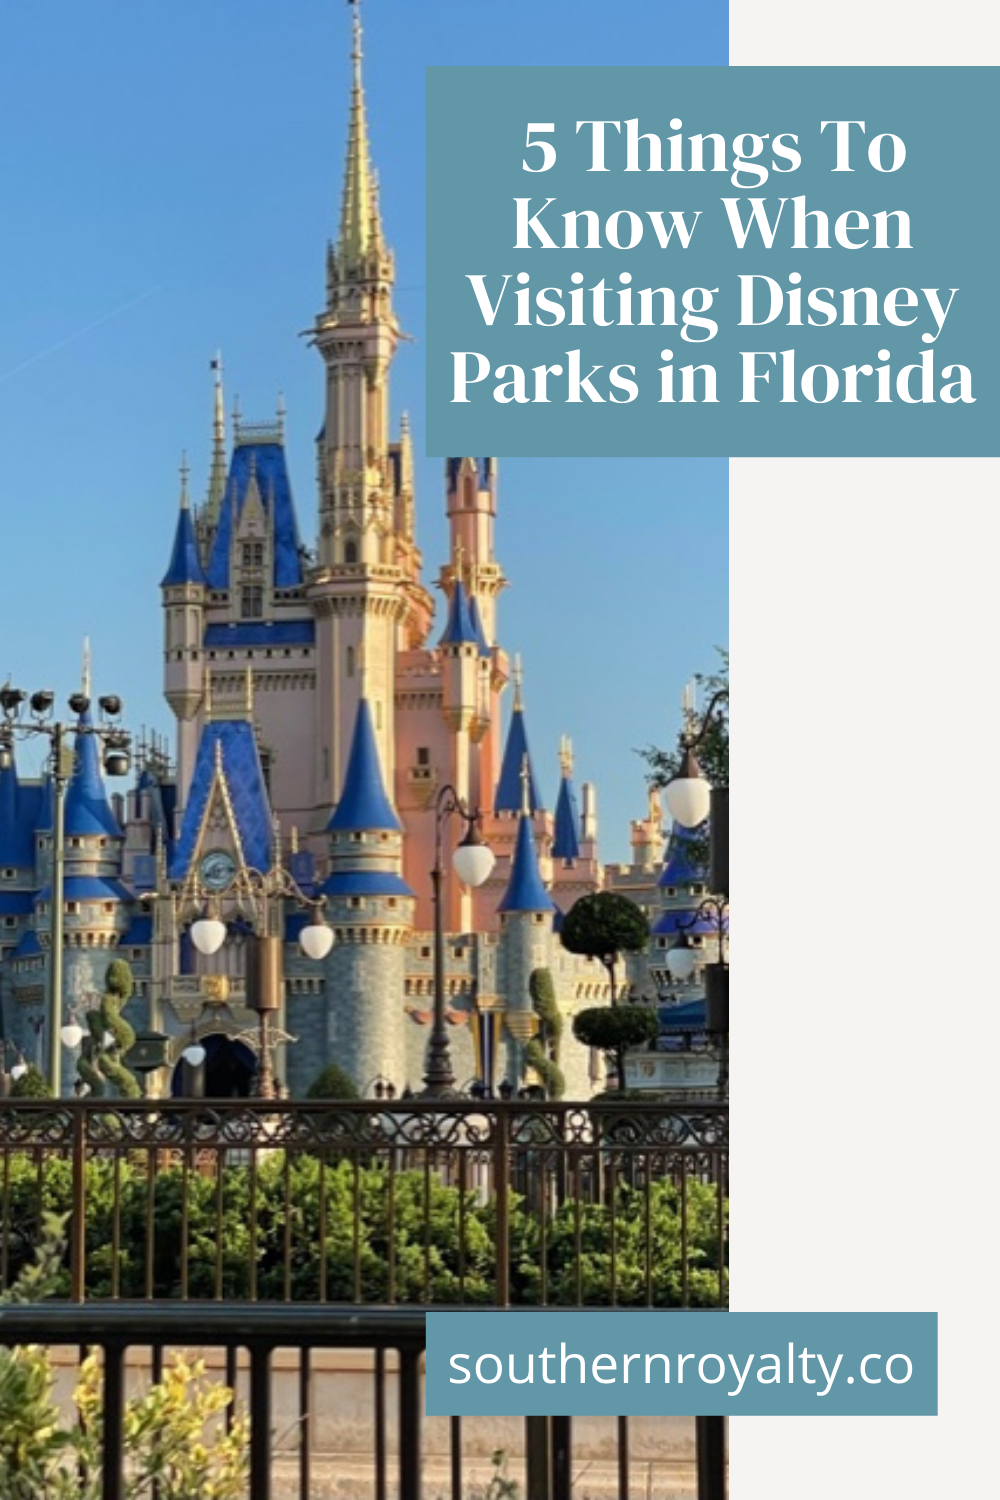 5 tips to visiting Disney parks in 2021